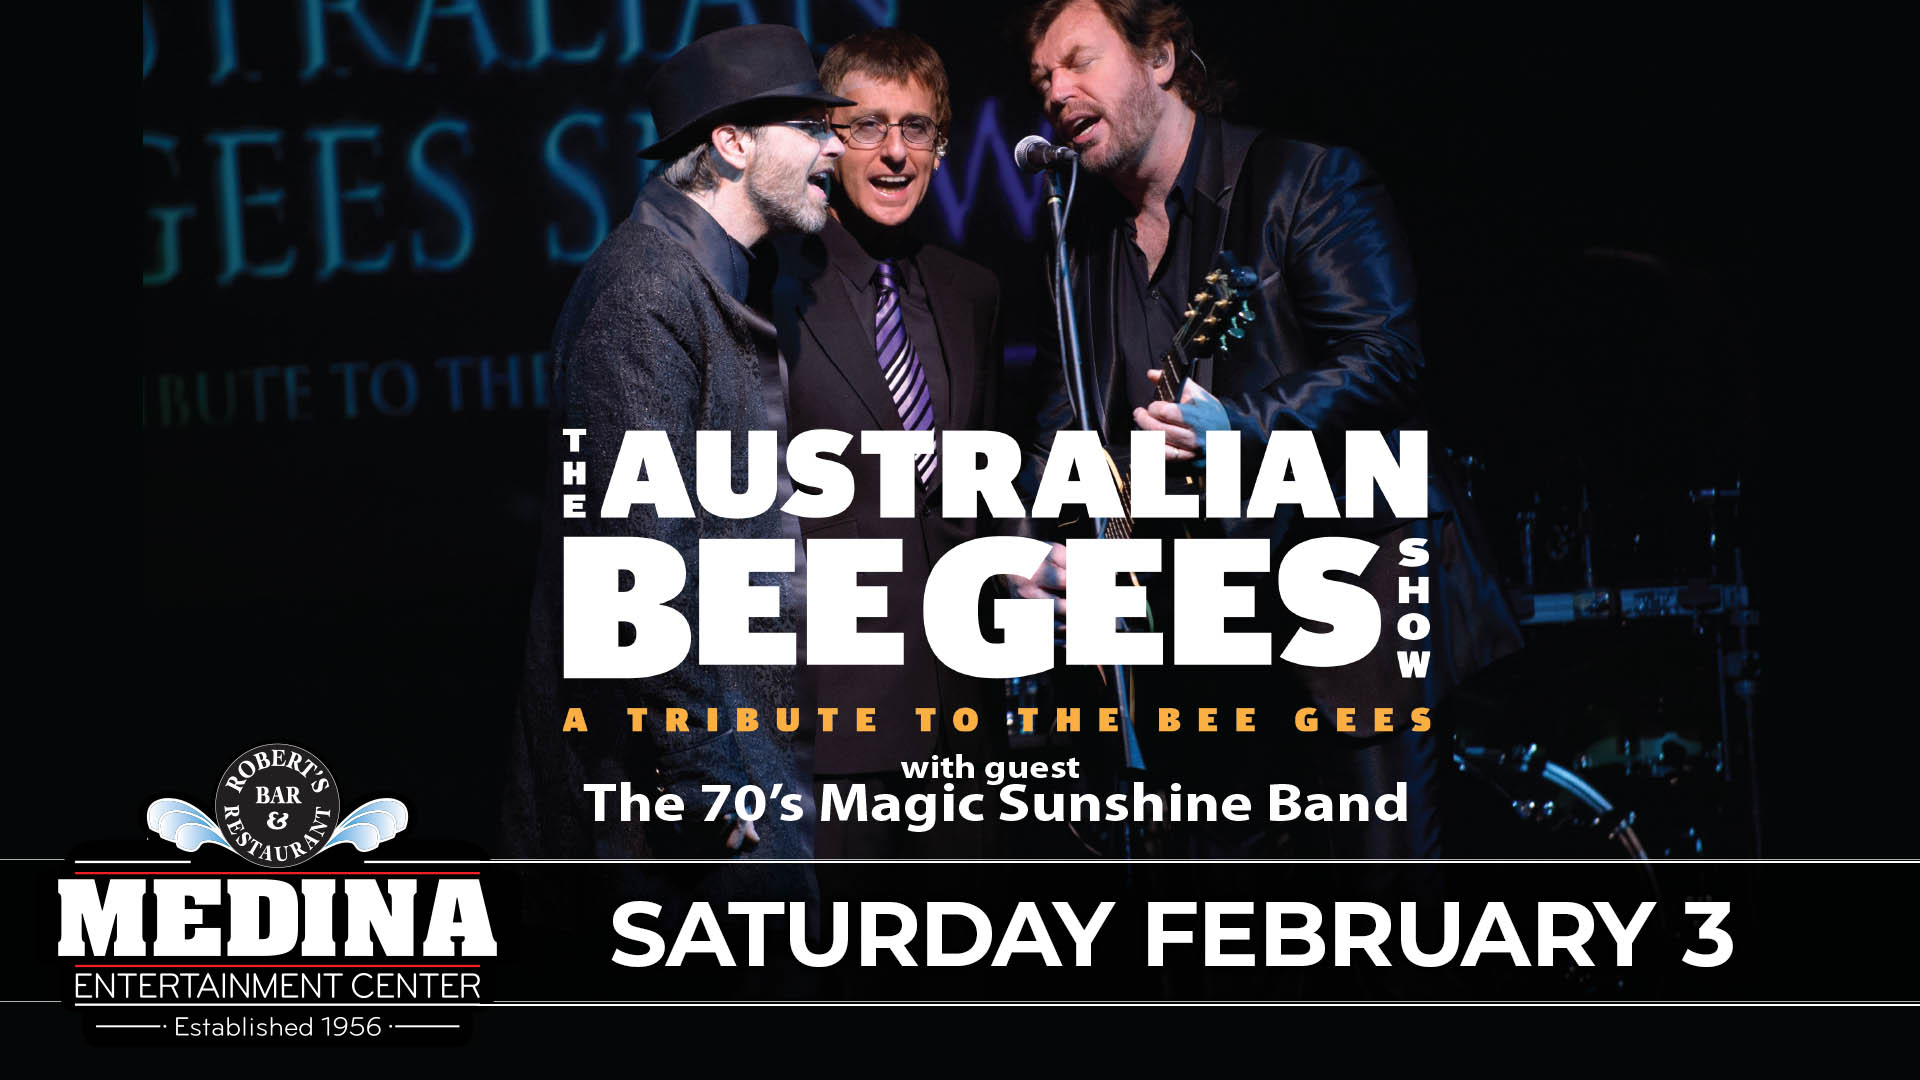 AUSTRALIAN BEE GEE’S With Guest 70’s Magic Sunshine Band Medina Entertainment Center Saturday, February 3rd, 2024 Doors: 6:30PM | Music: 7:30PM | 21+ Tickets on-sale Friday, December 8th at 11AM General Seating $28/ Silver Reserved $33 / Gold Reserved $38 plus applicable fees